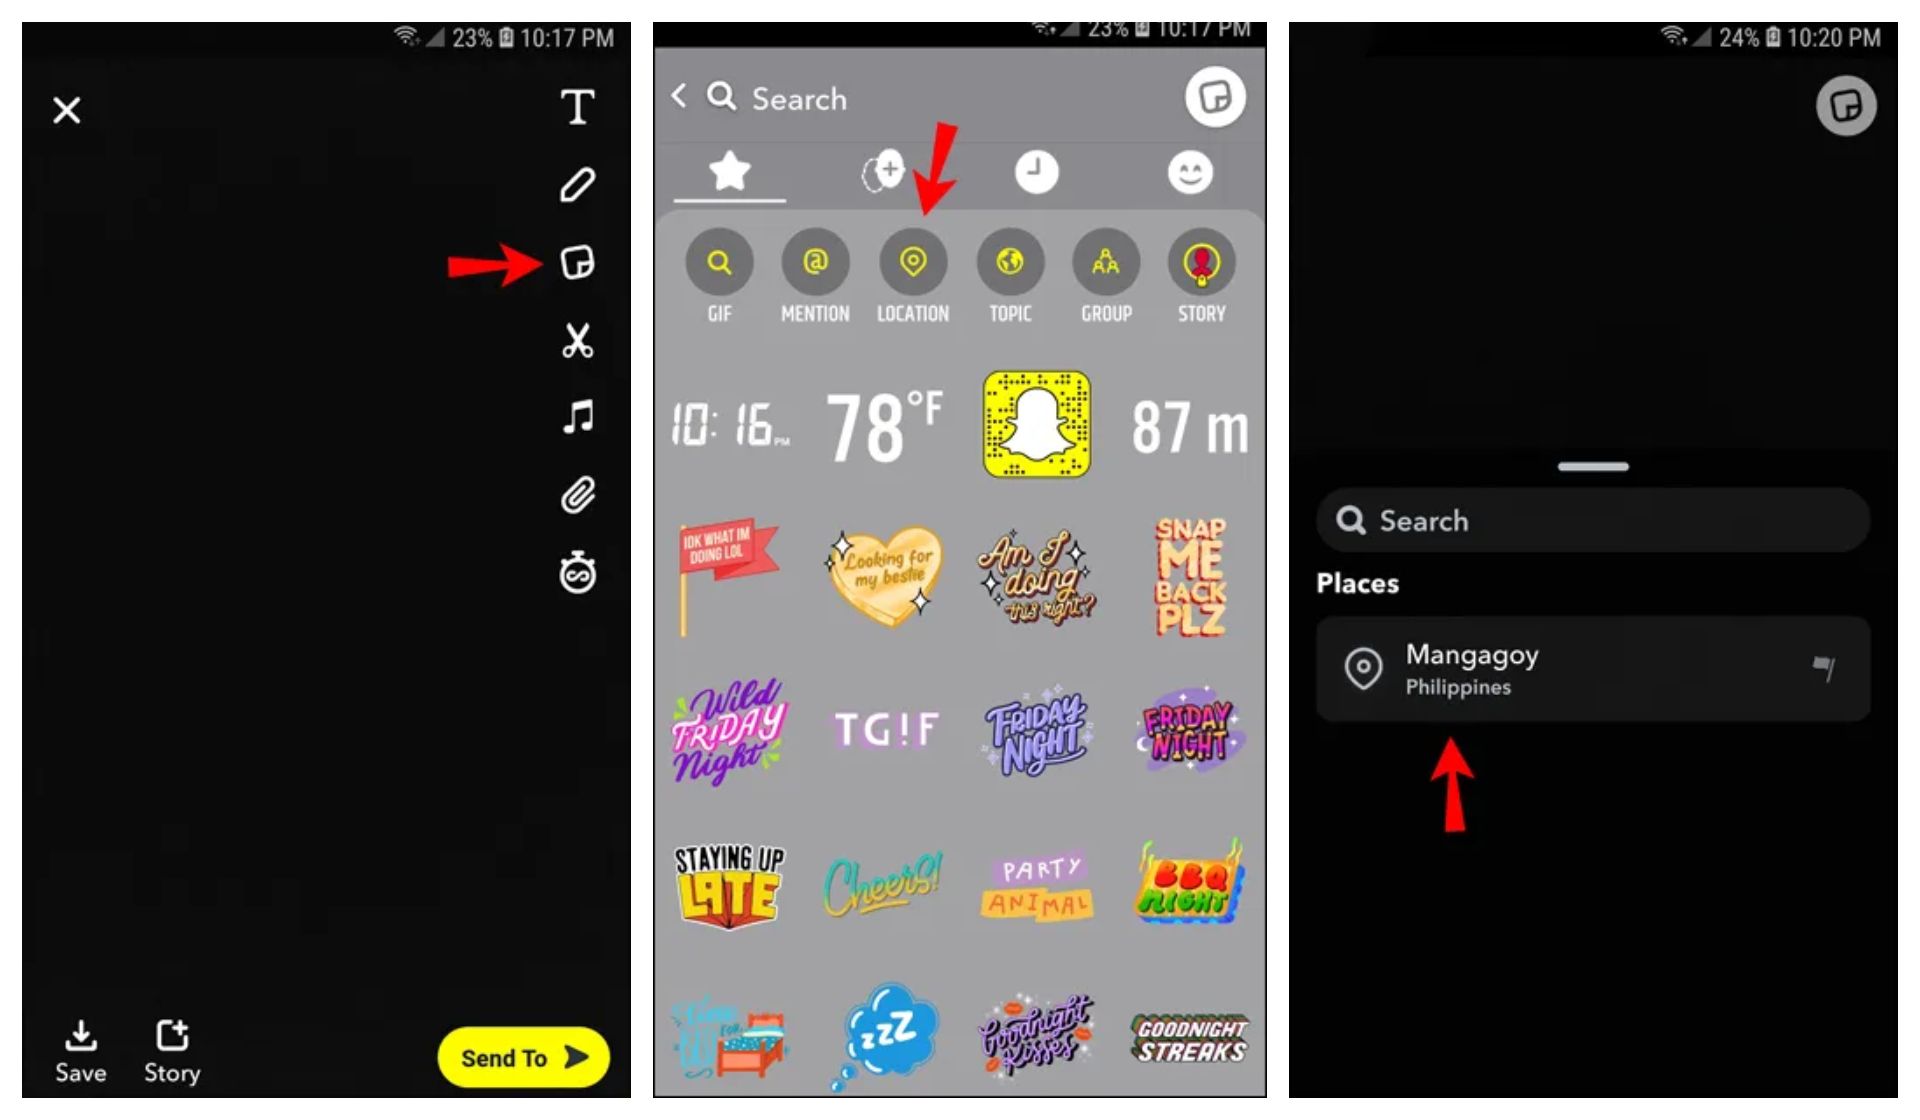 In this article, we are going to be going over how to add location filters on Snapchat, so you can customize your posts on the app however you like.